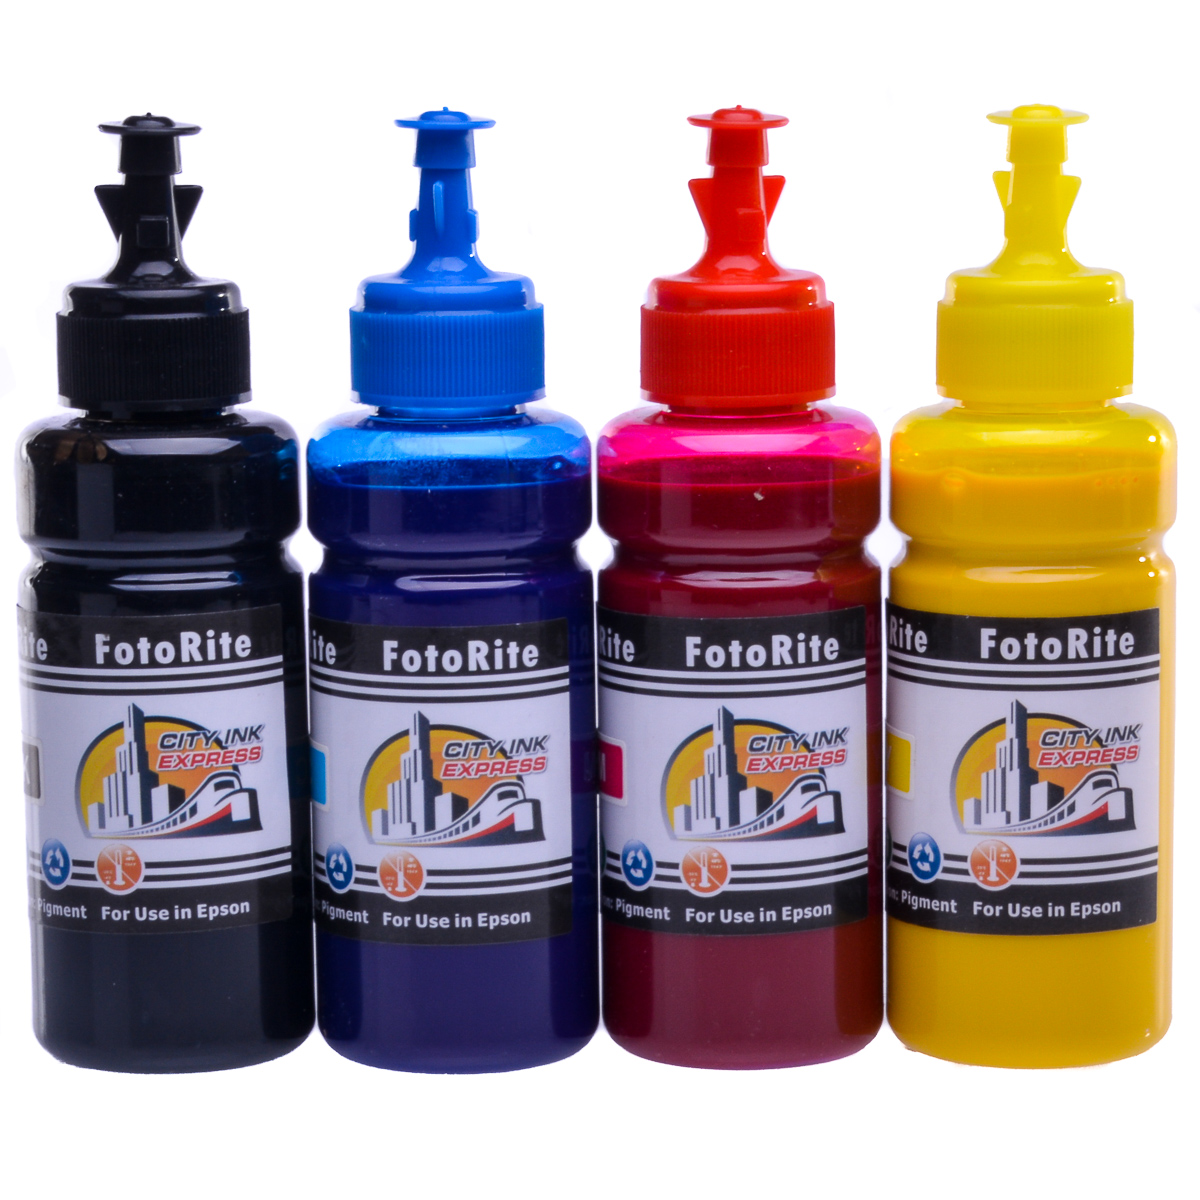 Cheap Multipack pigment ink refill replaces Epson XP-4155